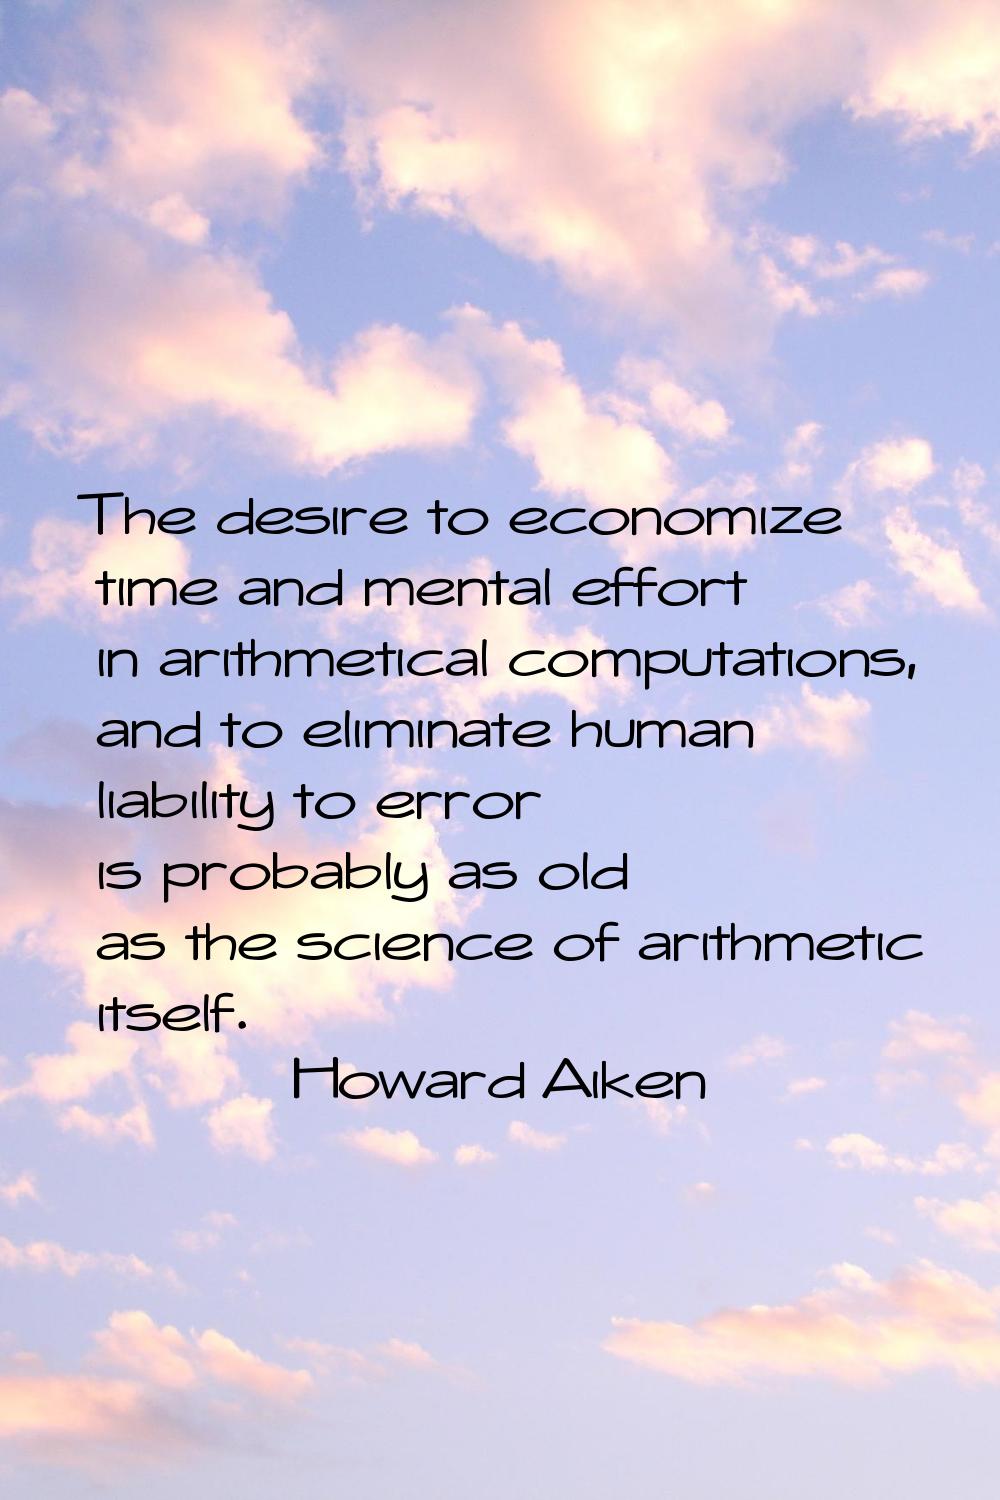 The desire to economize time and mental effort in arithmetical computations, and to eliminate human